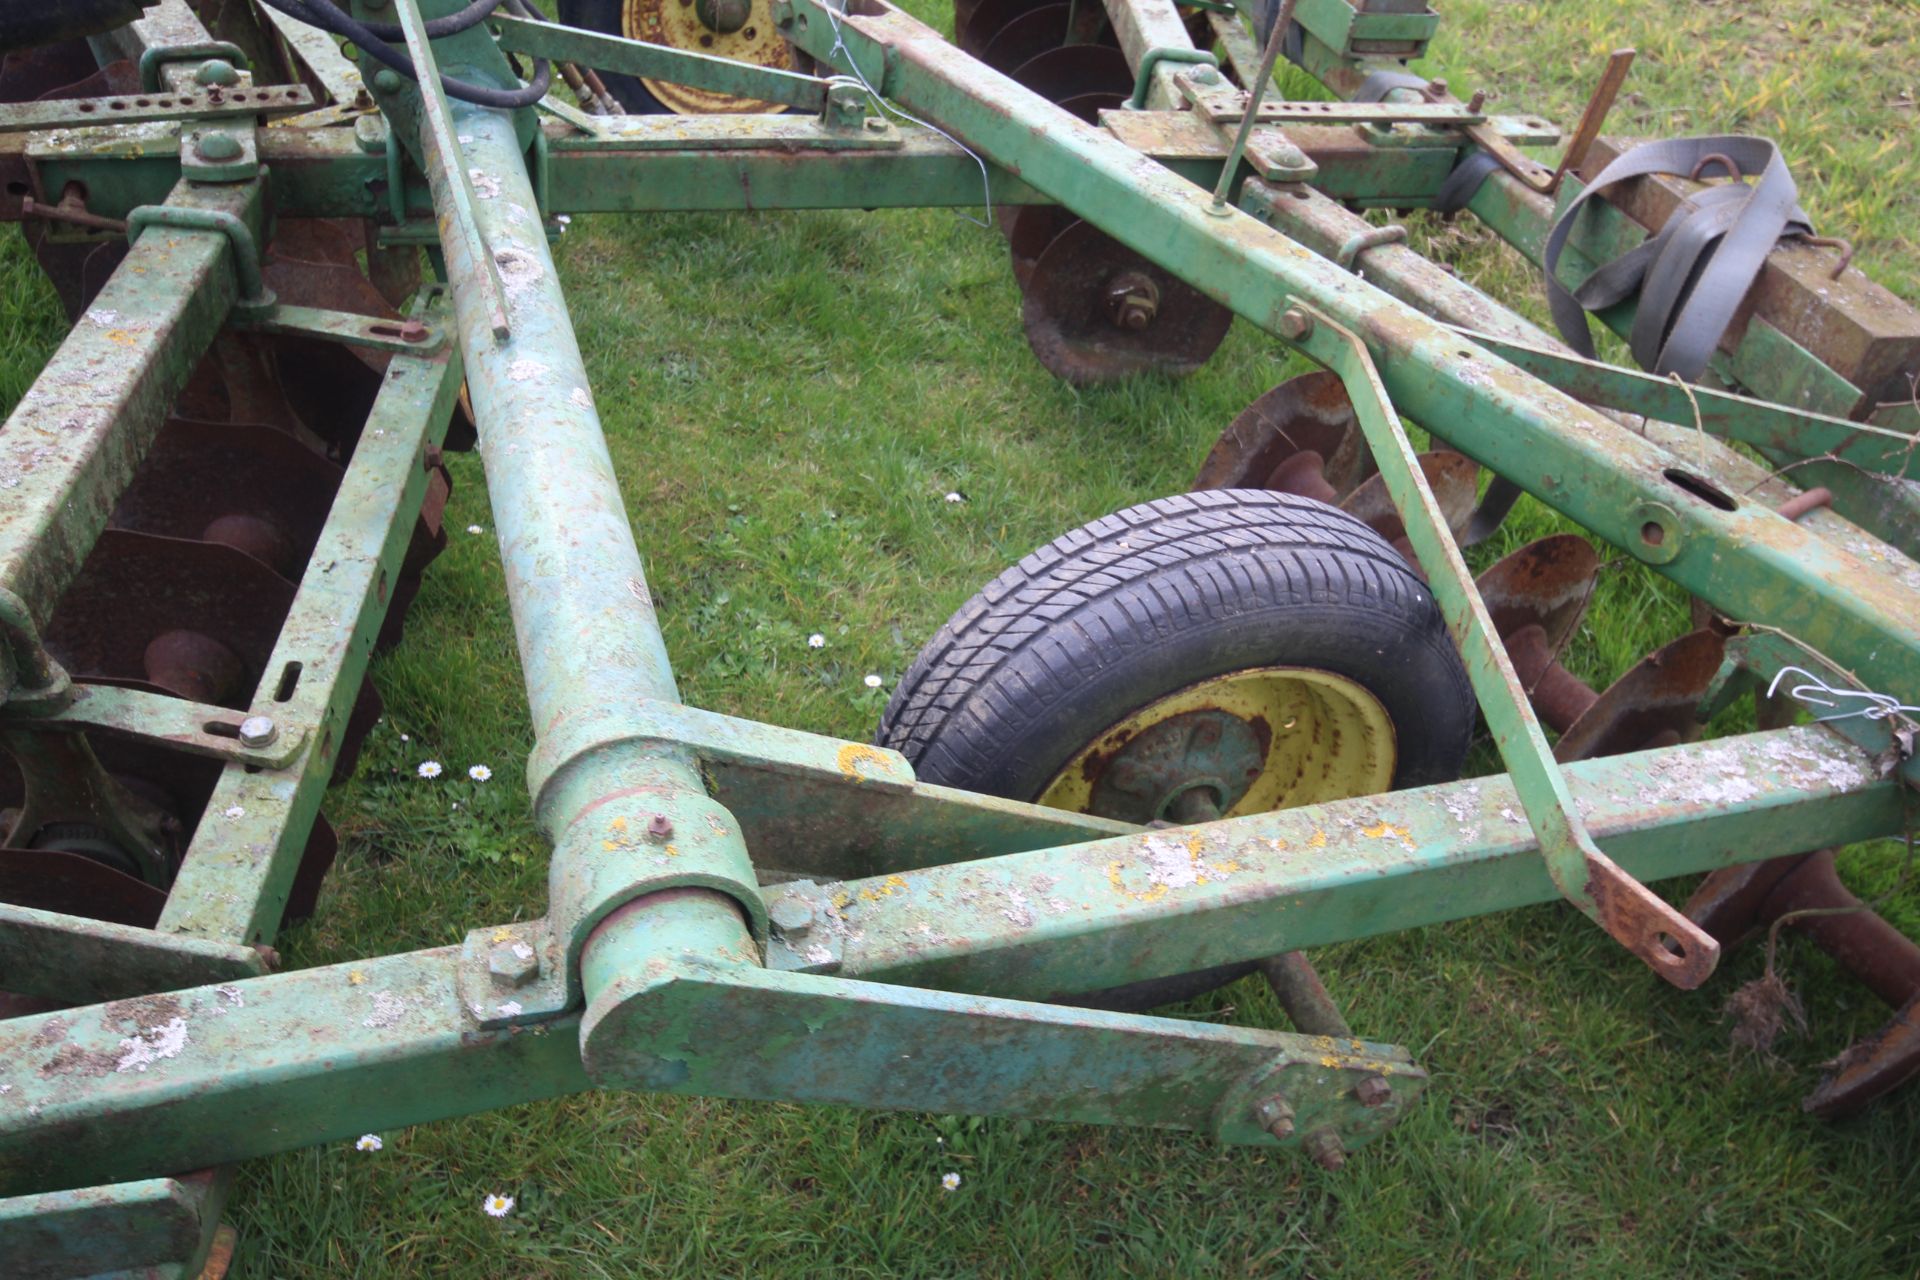 John Deere 3.5m trailed discs. For sale due to retirement. V - Image 6 of 15